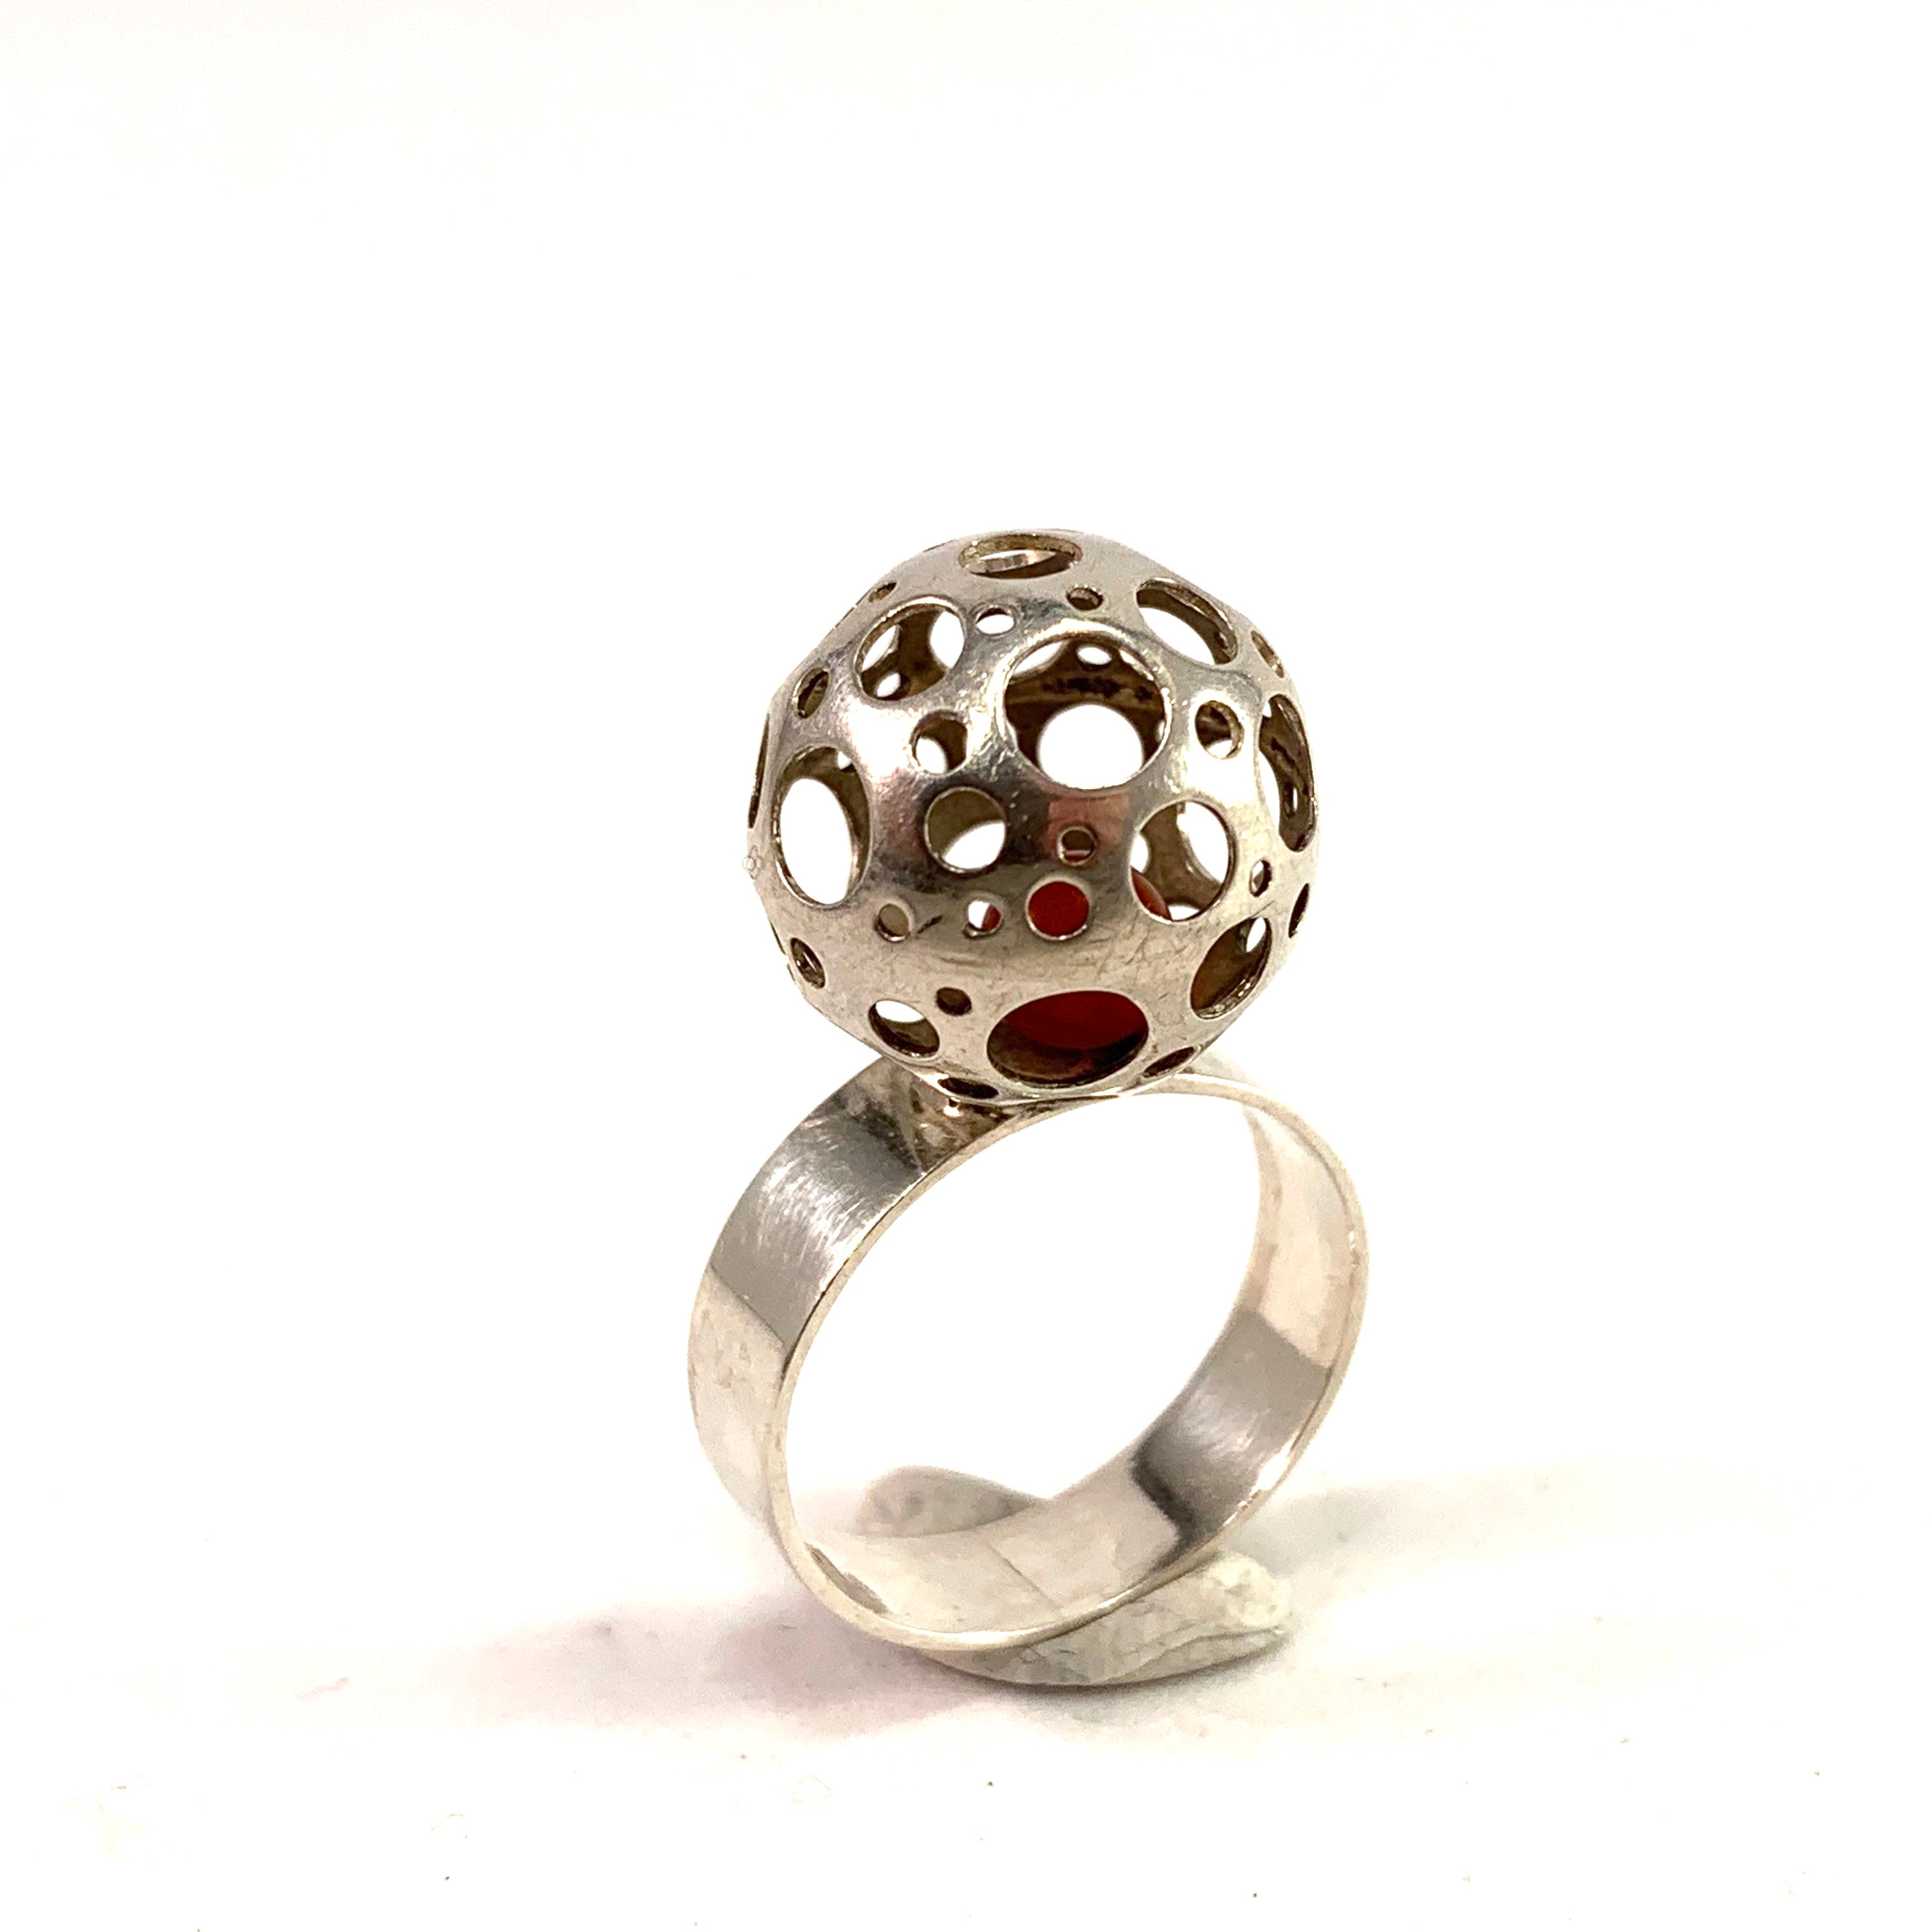 Liisa Vitali for N Westerback, Finland year 1973 Sterling Silver Trapped Carnelian Sphere Ring.